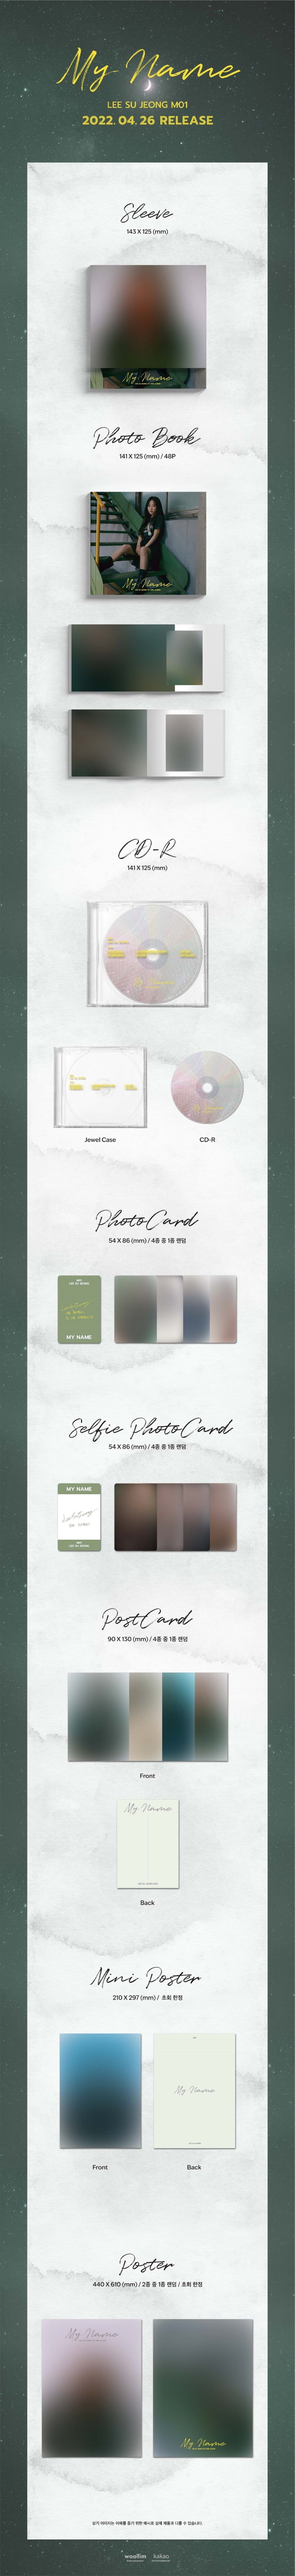 LEE SU JEONG's 1st mini album [My Name] “On this beautiful night, hold you and dance” “Our own dance starts again” “We dre...